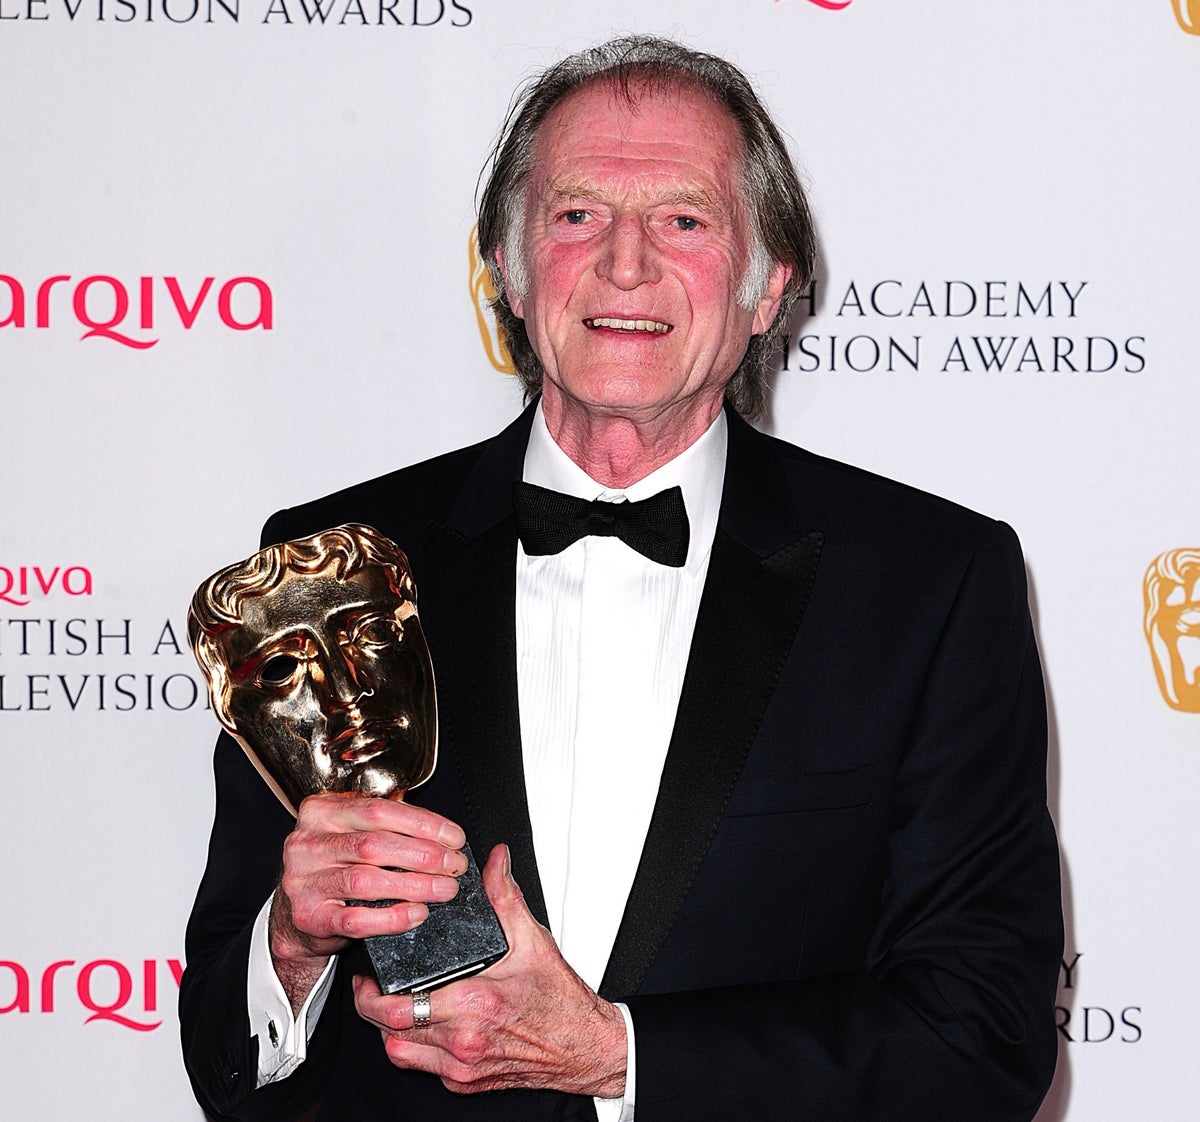 Tv Baftas 14 David Bradley Wins Best Supporting Actor For Broadchurch The Independent The Independent